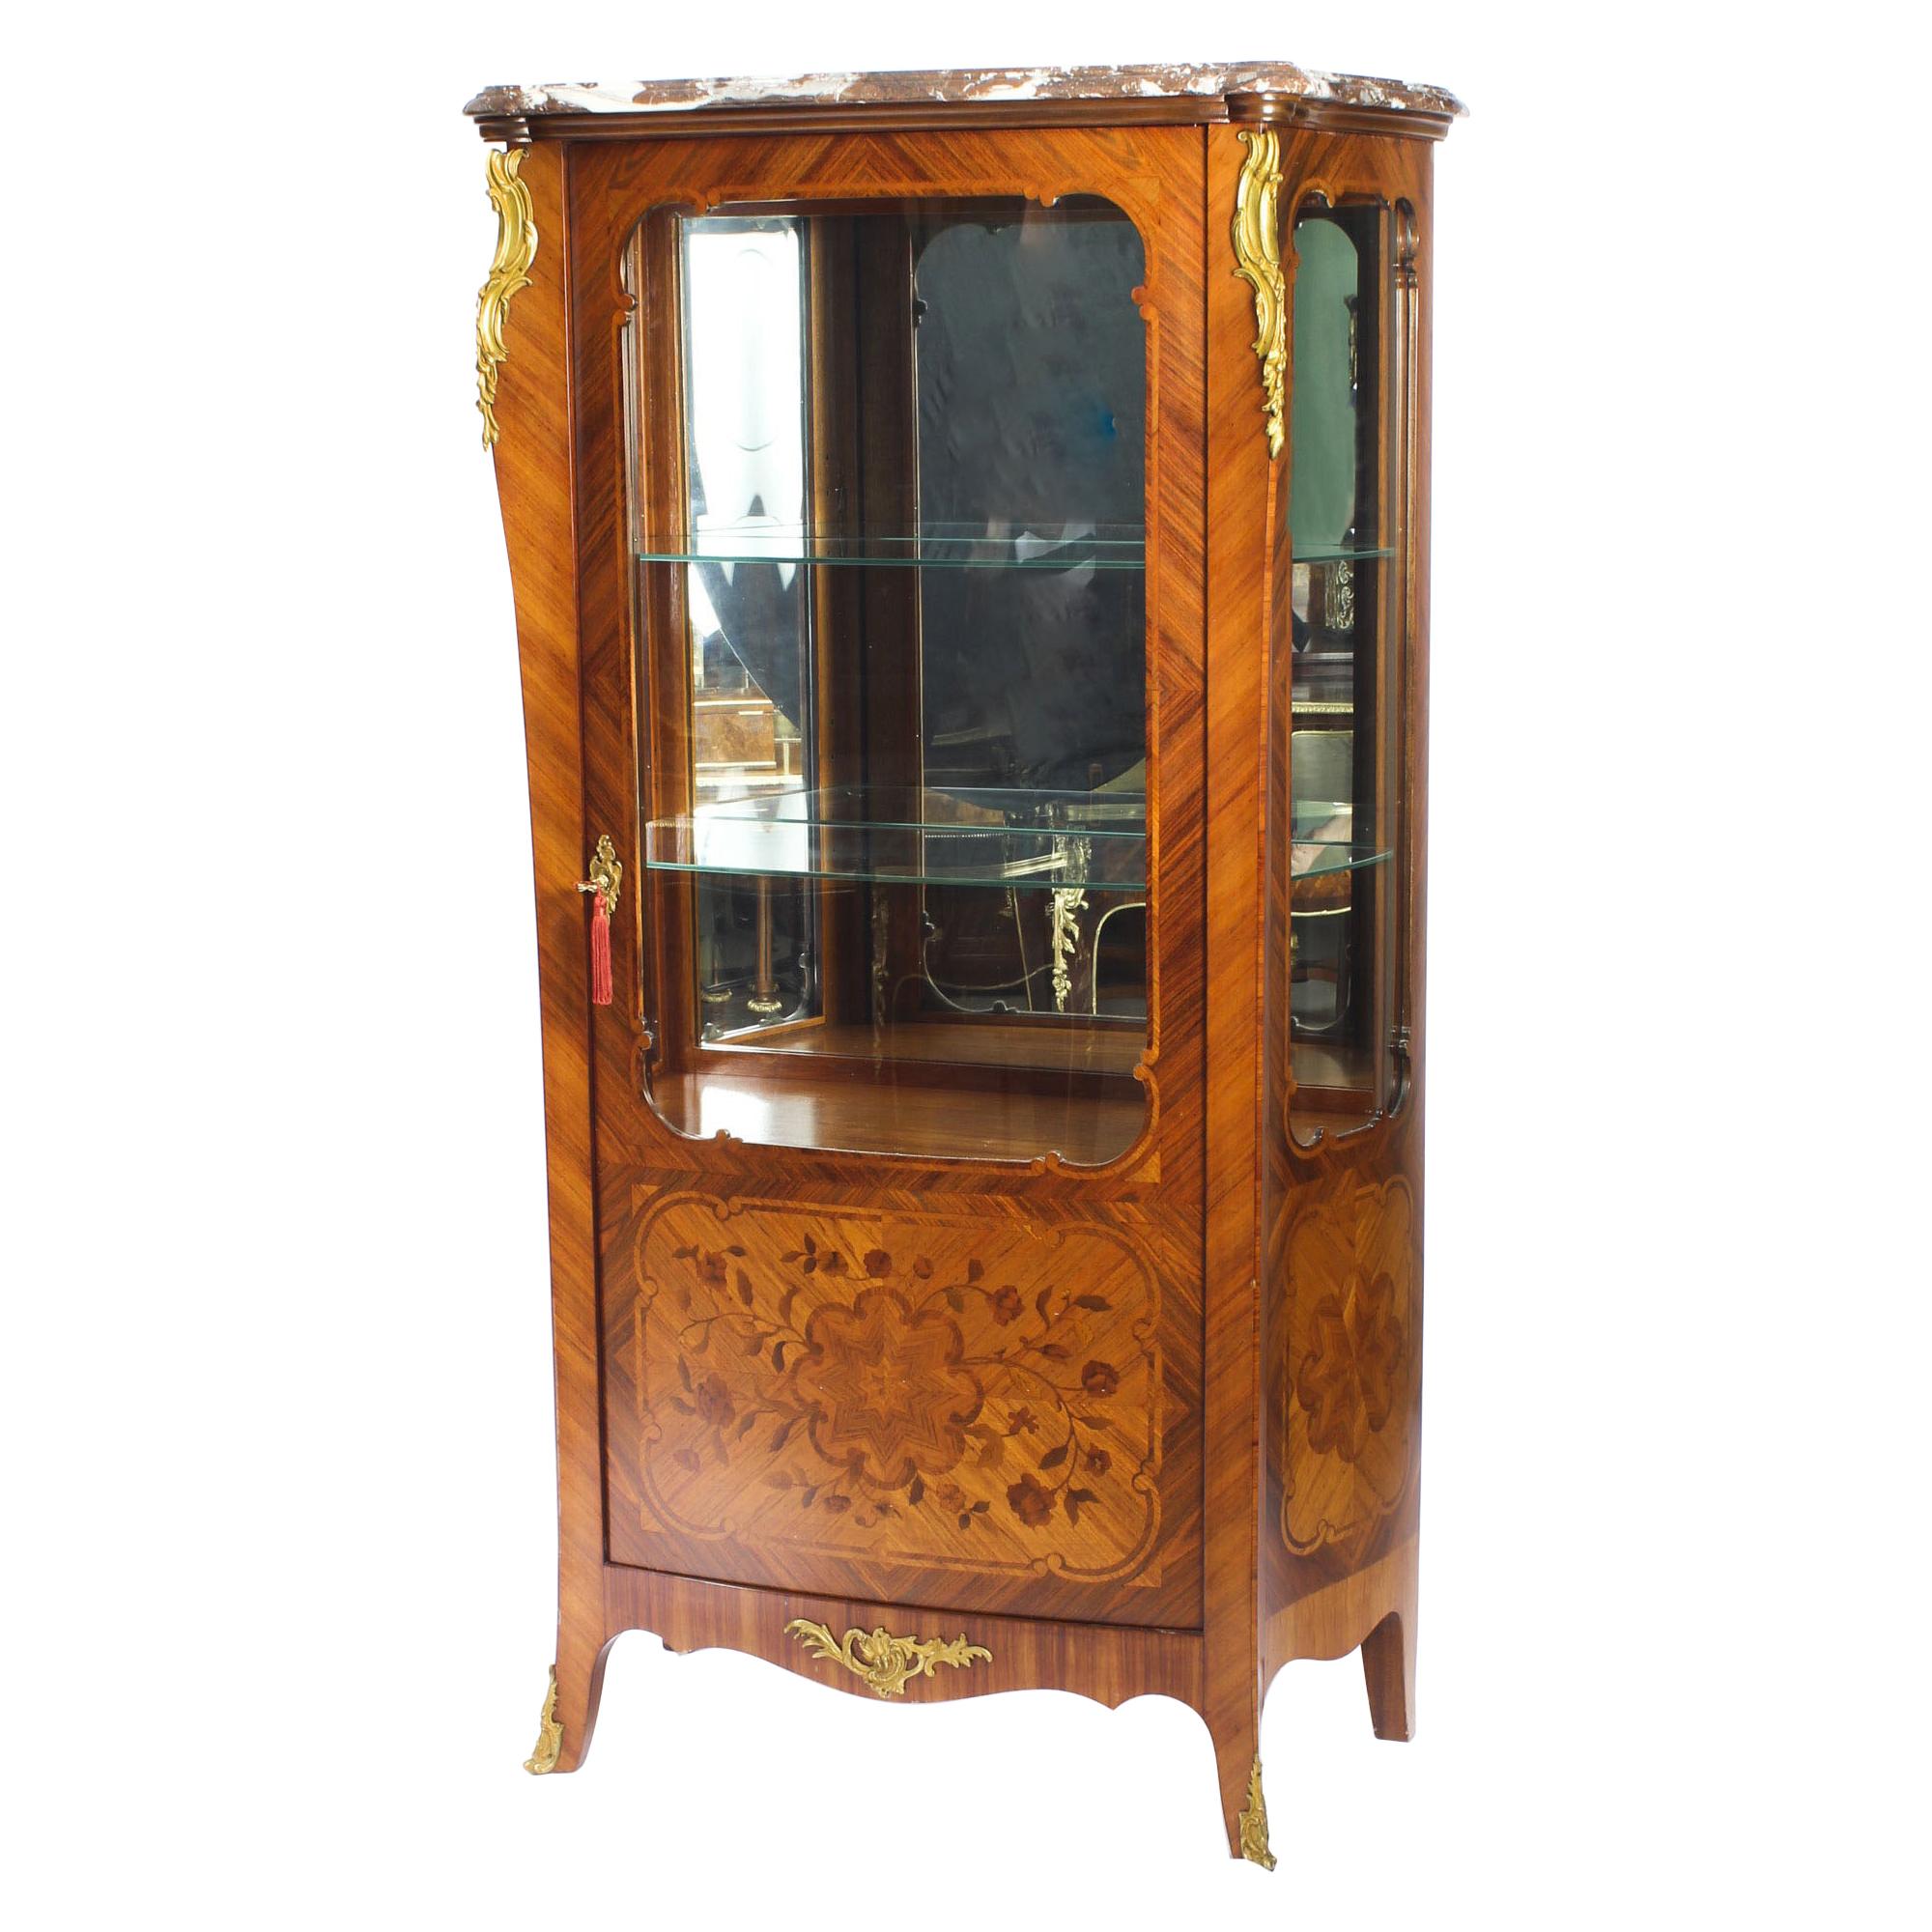 Antique French  Marquetry Ormolu Mounted Vitrine Cabinet, 19th Century